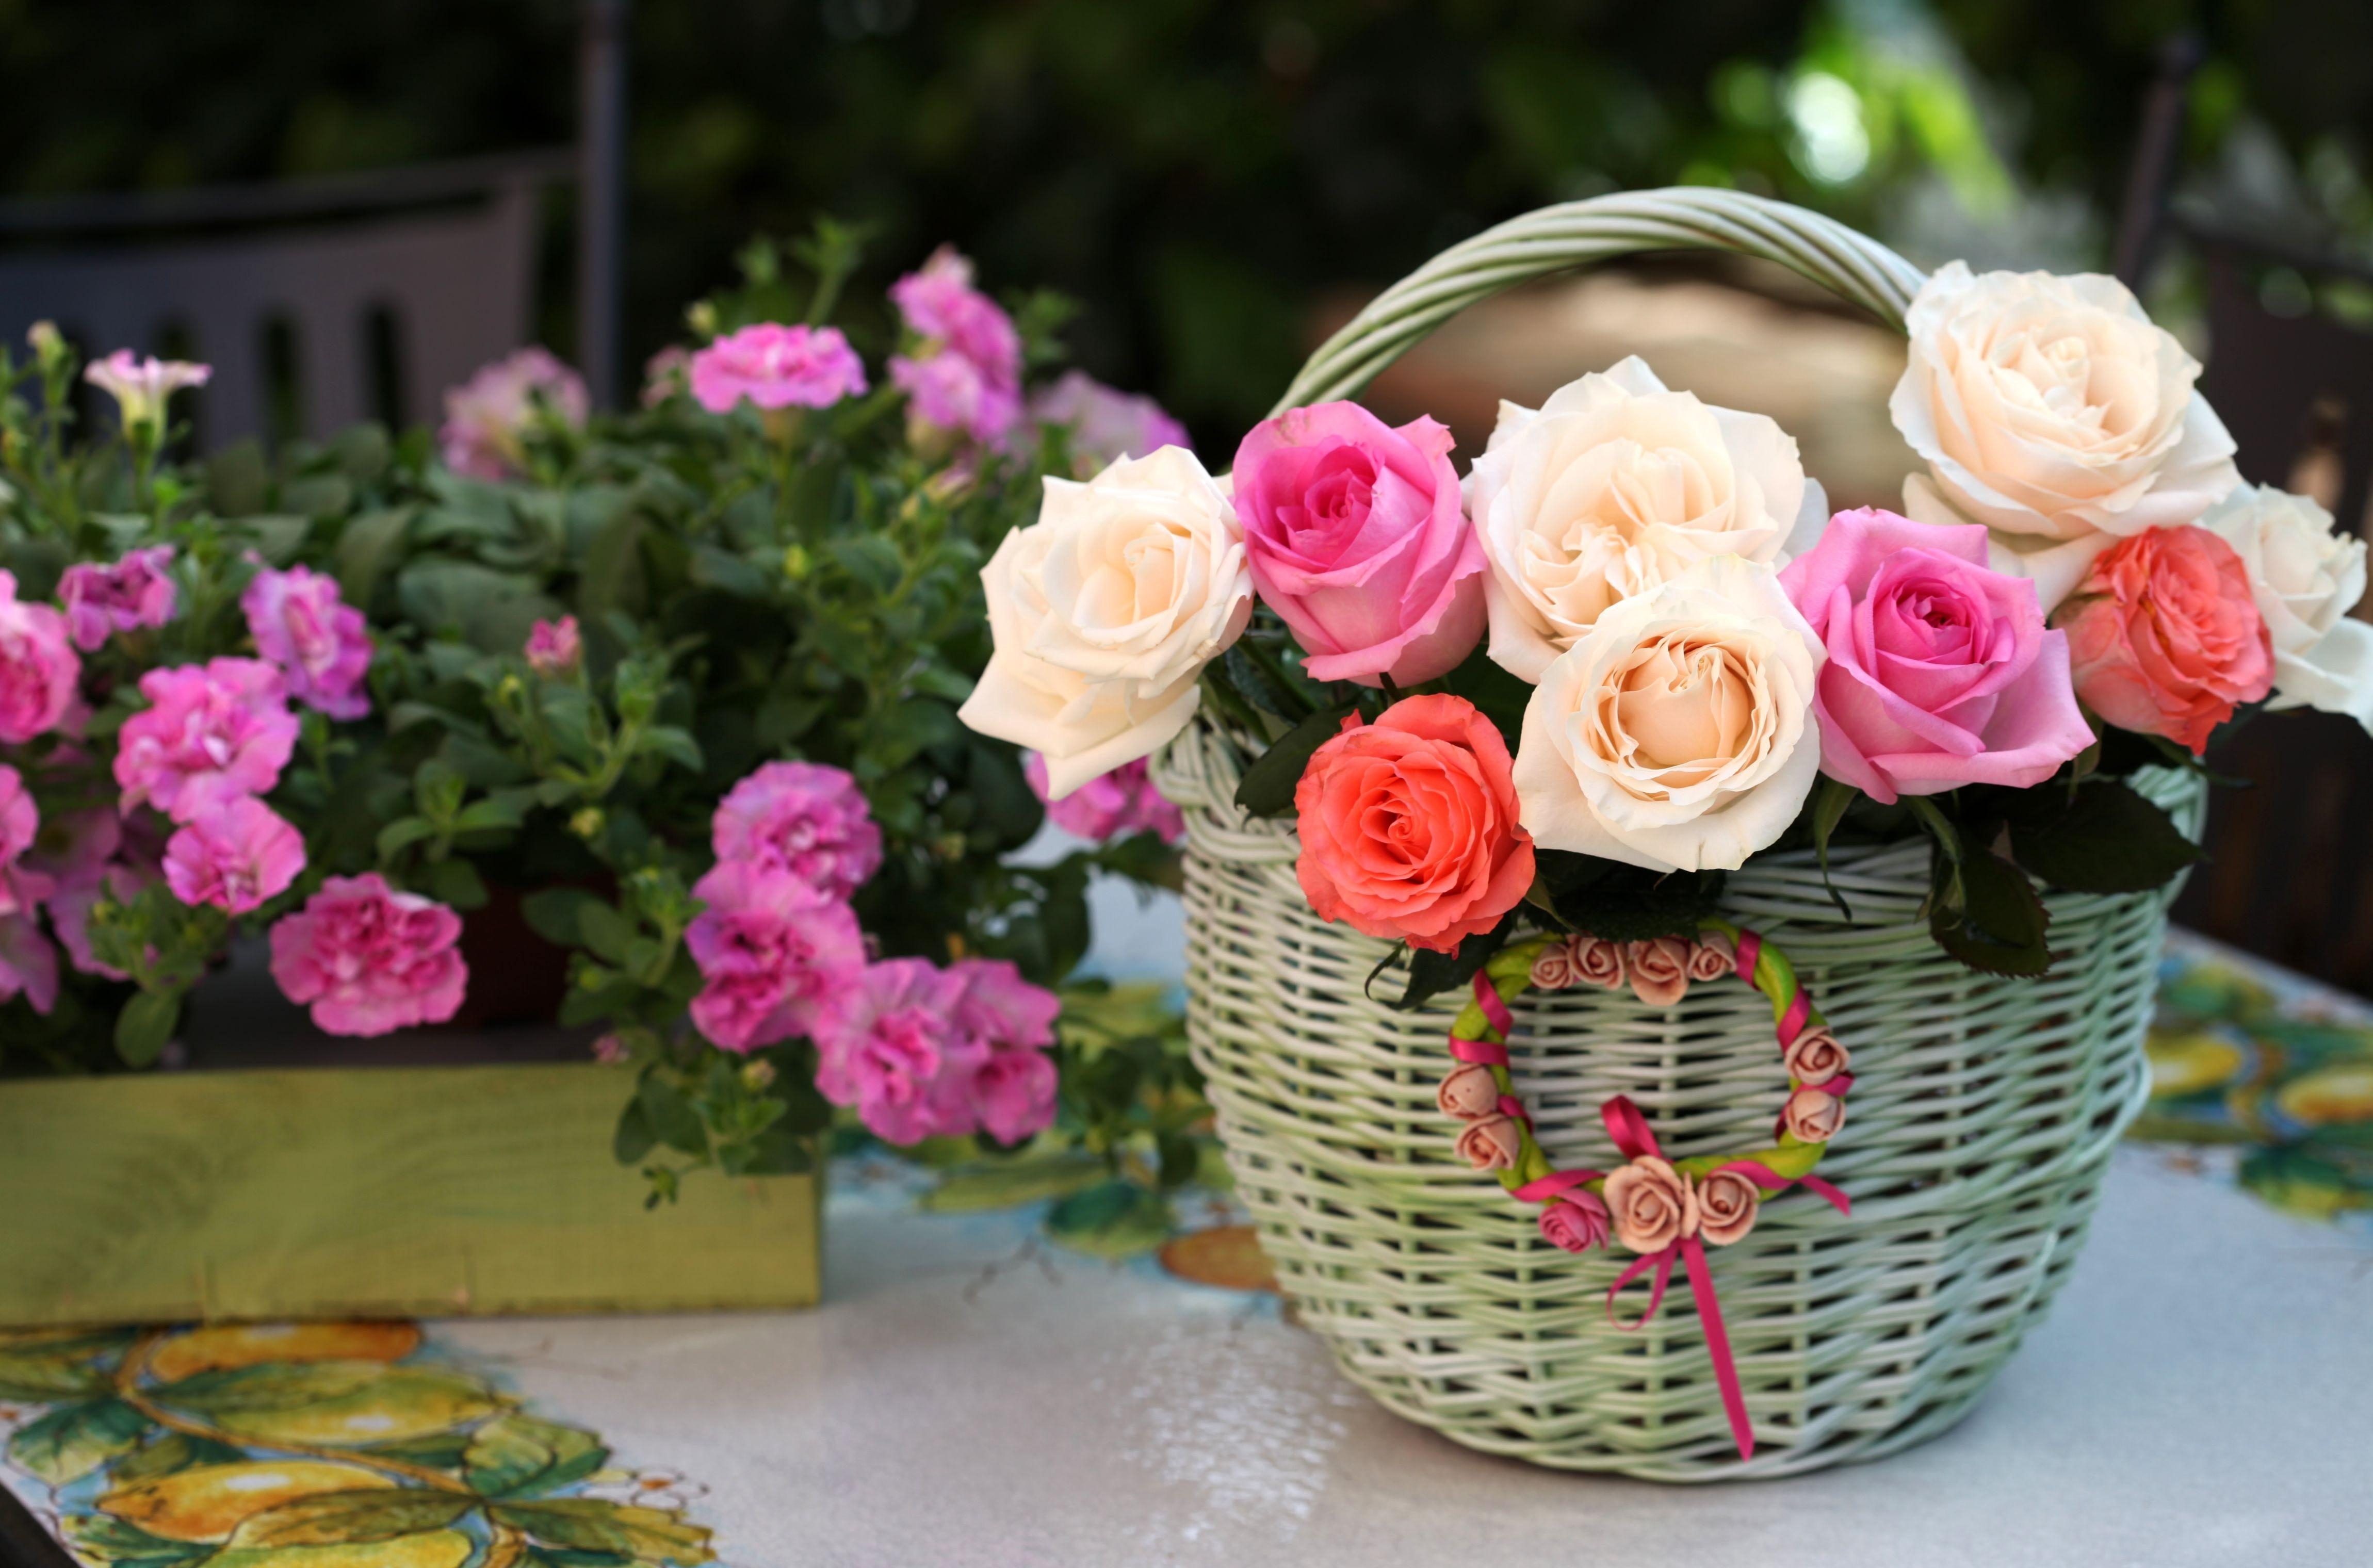 Free photo A basket of colored roses